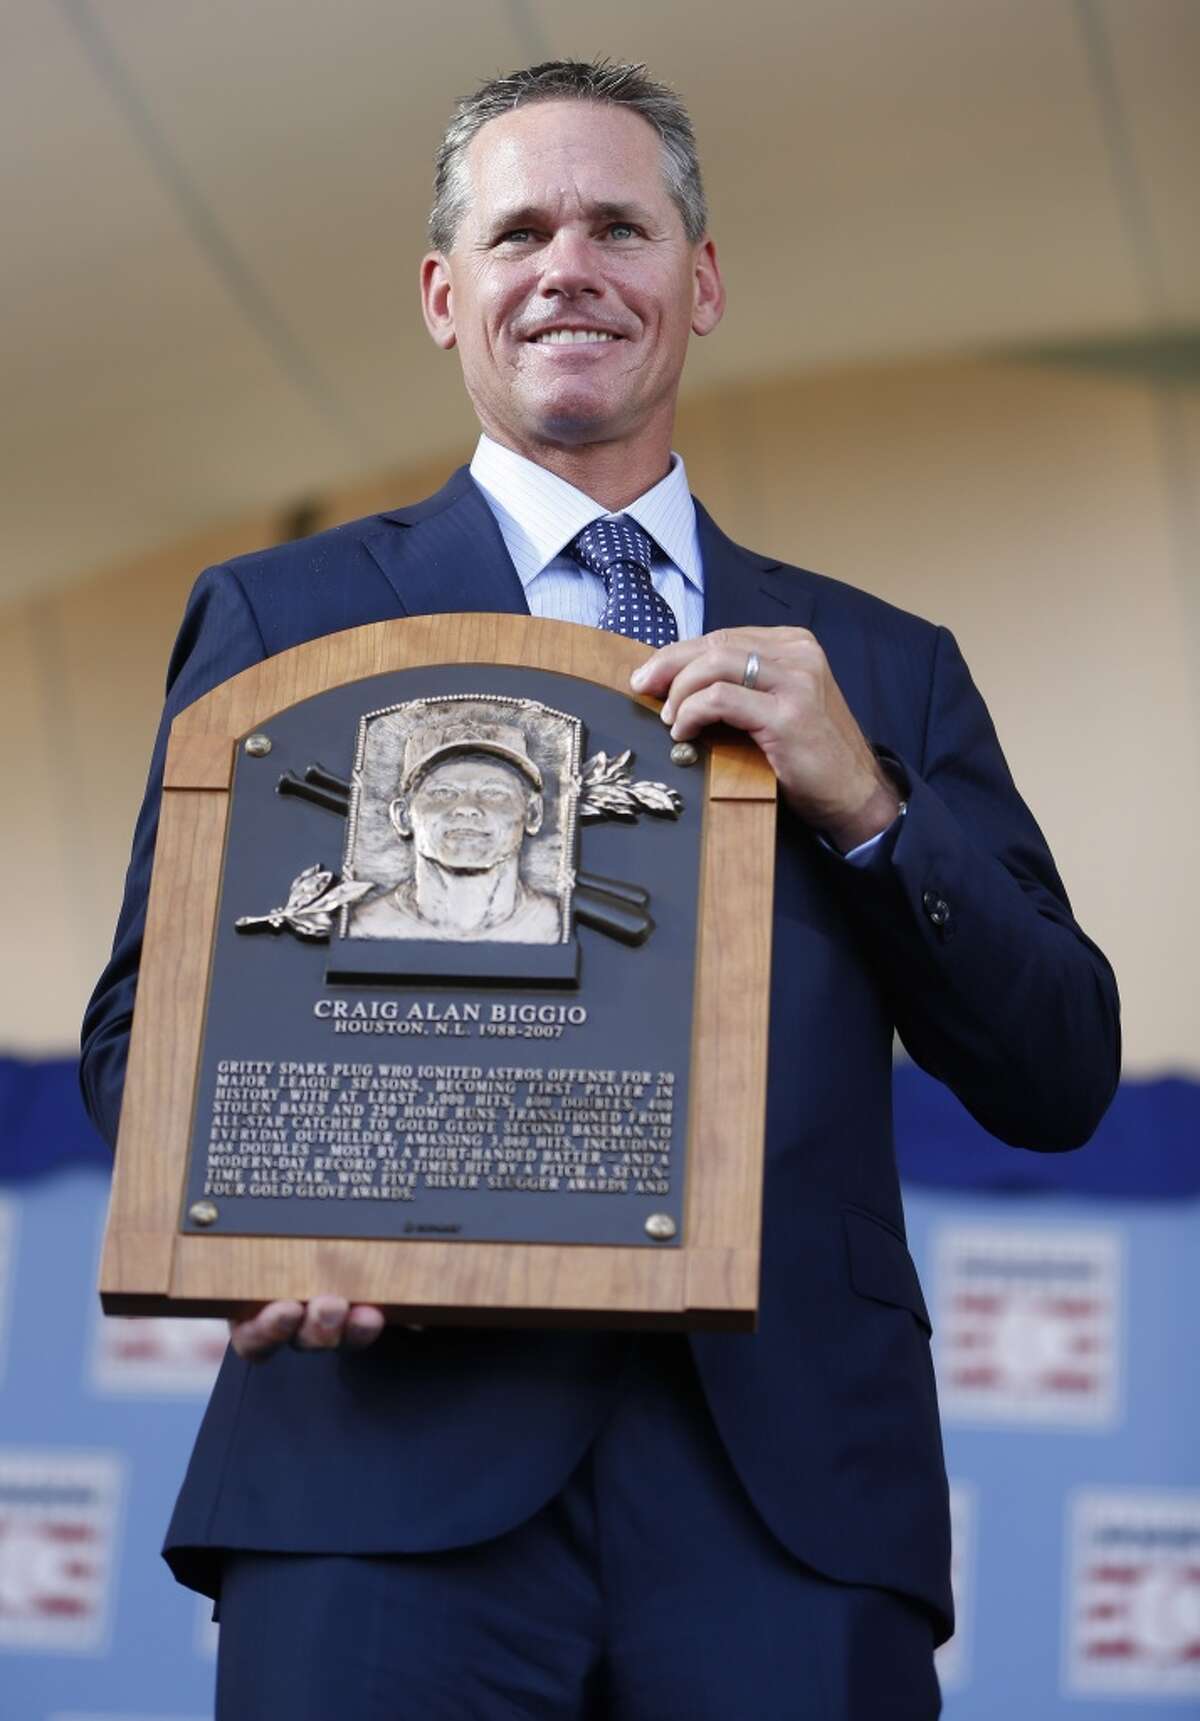 Craig Biggio holds his Hall of Fame plaque at the conclusion of the Hall of Fame induction ceremony on the grounds at Clark Sports Center on Sunday, July 26, 2015, in Cooperstown. ( Karen Warren / Houston Chronicle )